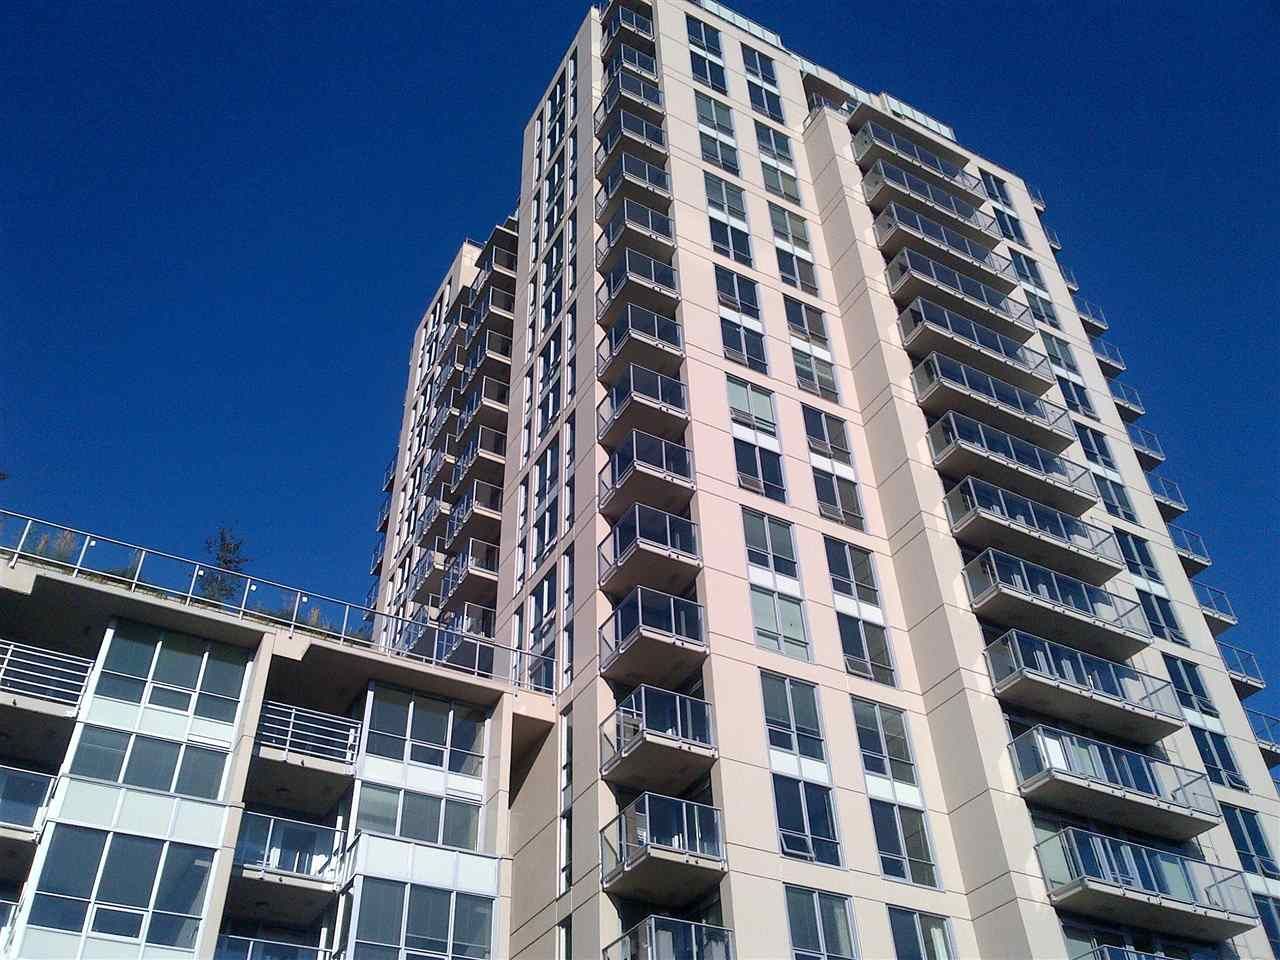 Main Photo: 309 135 E 17TH Street in North Vancouver: Central Lonsdale Condo for sale : MLS®# R2017530